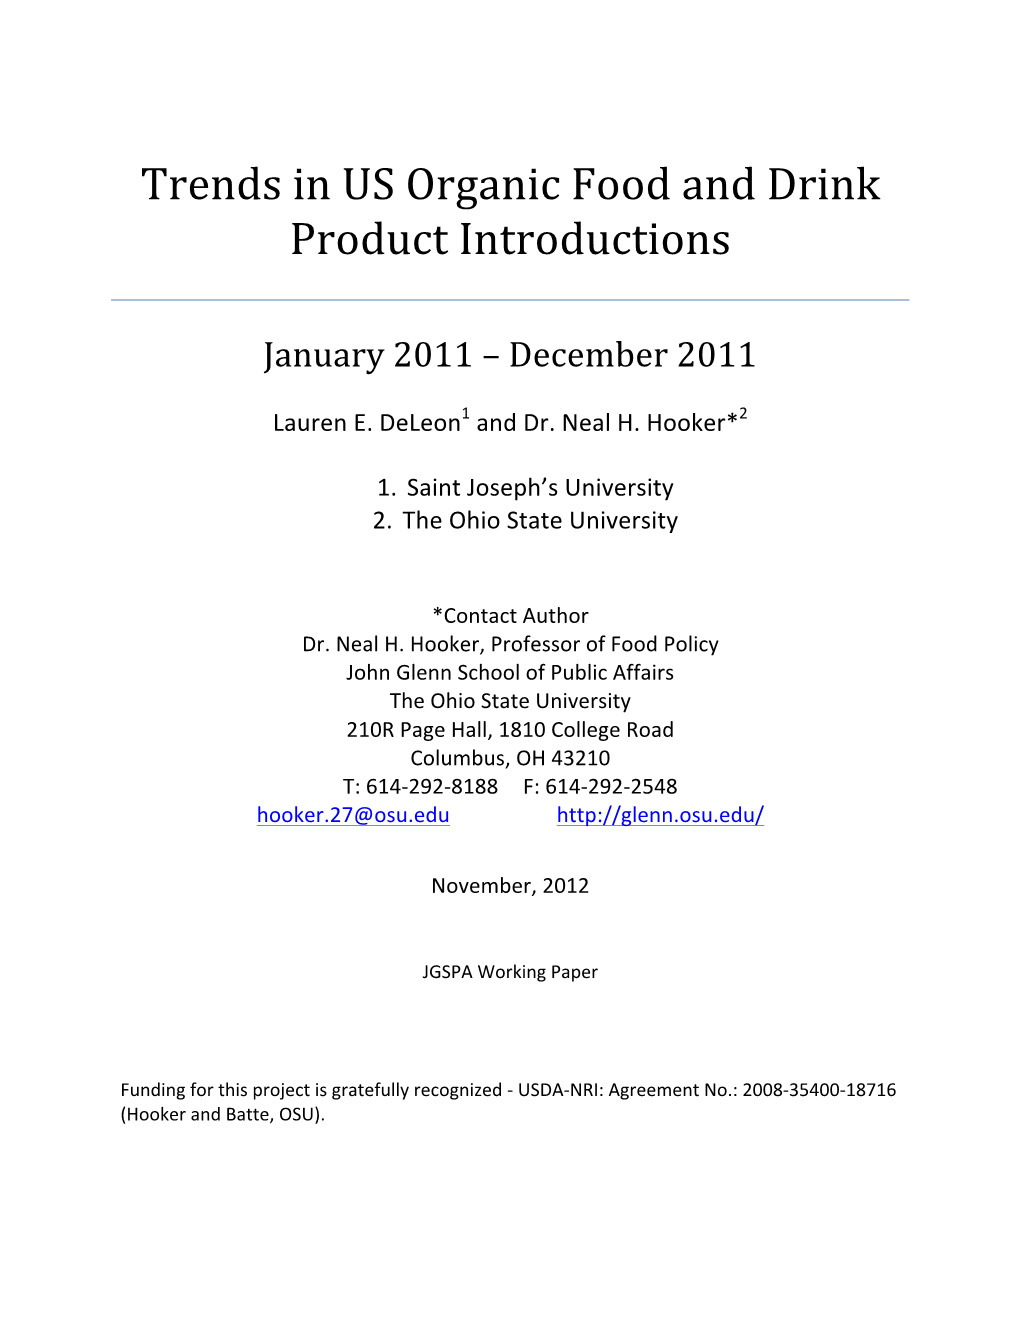 Trends in US Organic Food and Drink Product Introductions